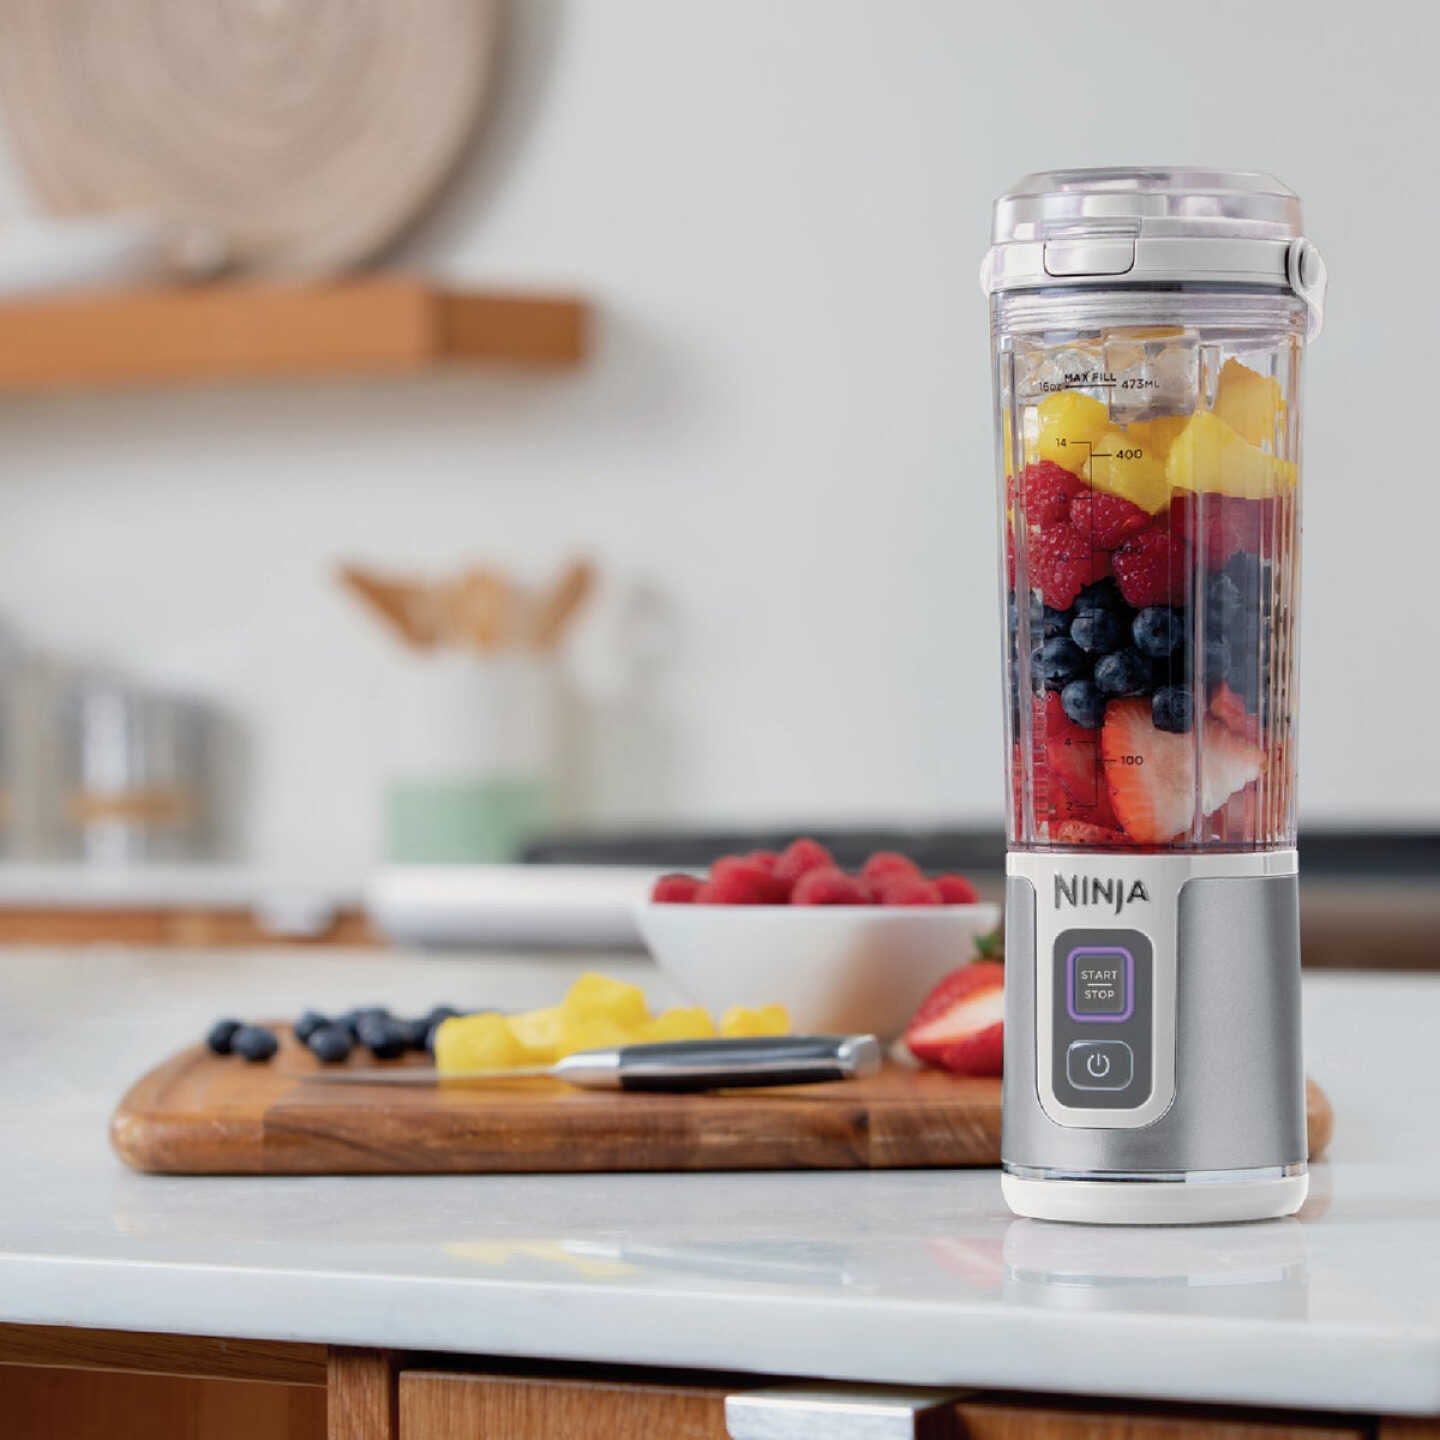 A Ninja Blender and Food Processor Is Only $160 on